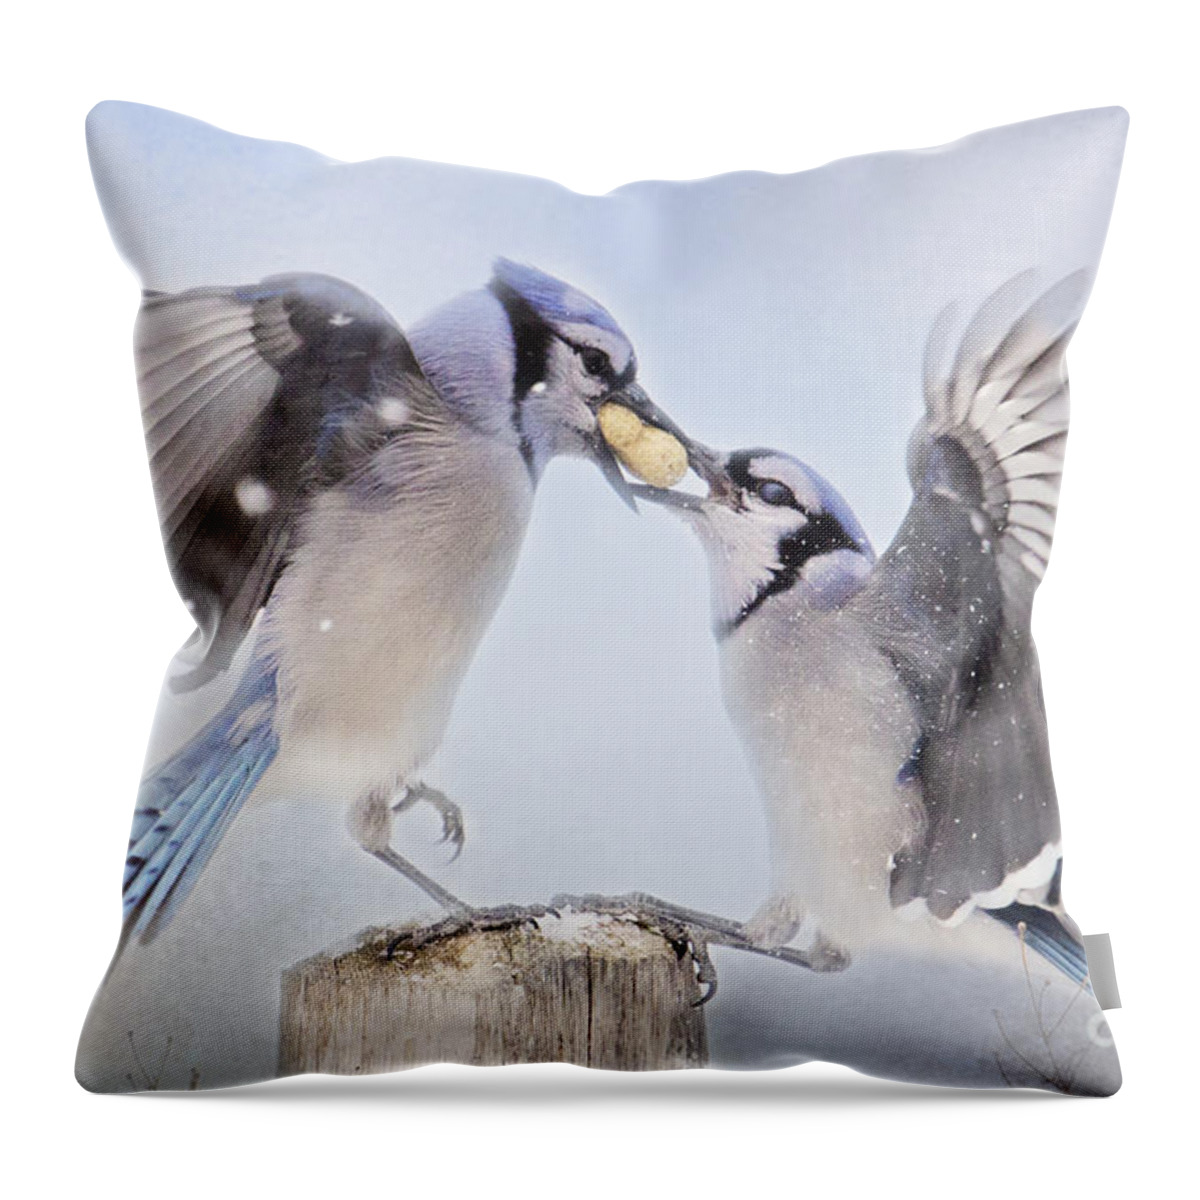 Birds Throw Pillow featuring the photograph Dueling Jays by Pam Holdsworth